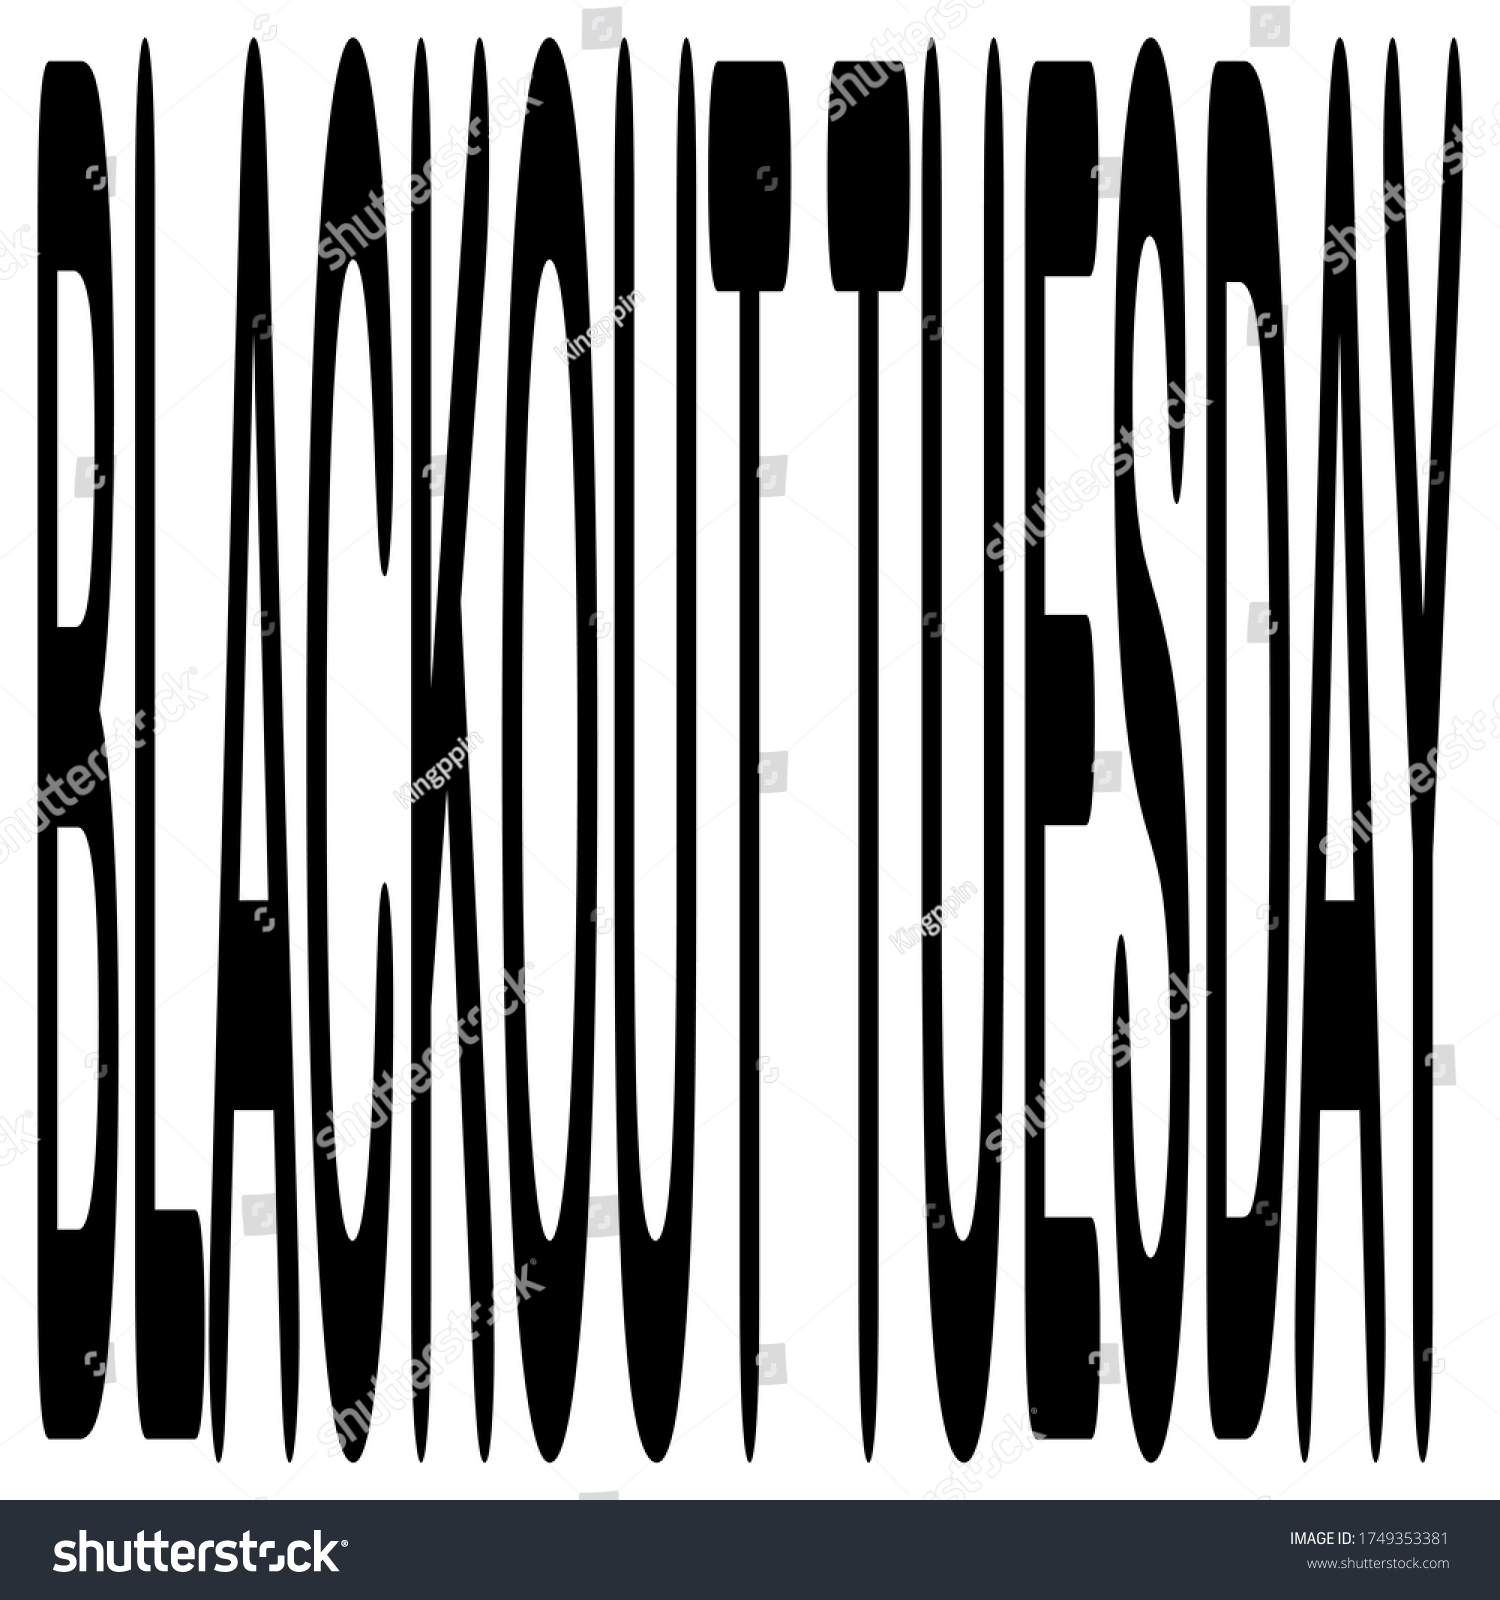 Vector isolated blackout tuesday text concept word on white background, illustration, monochrome, barcode concept #1749353381